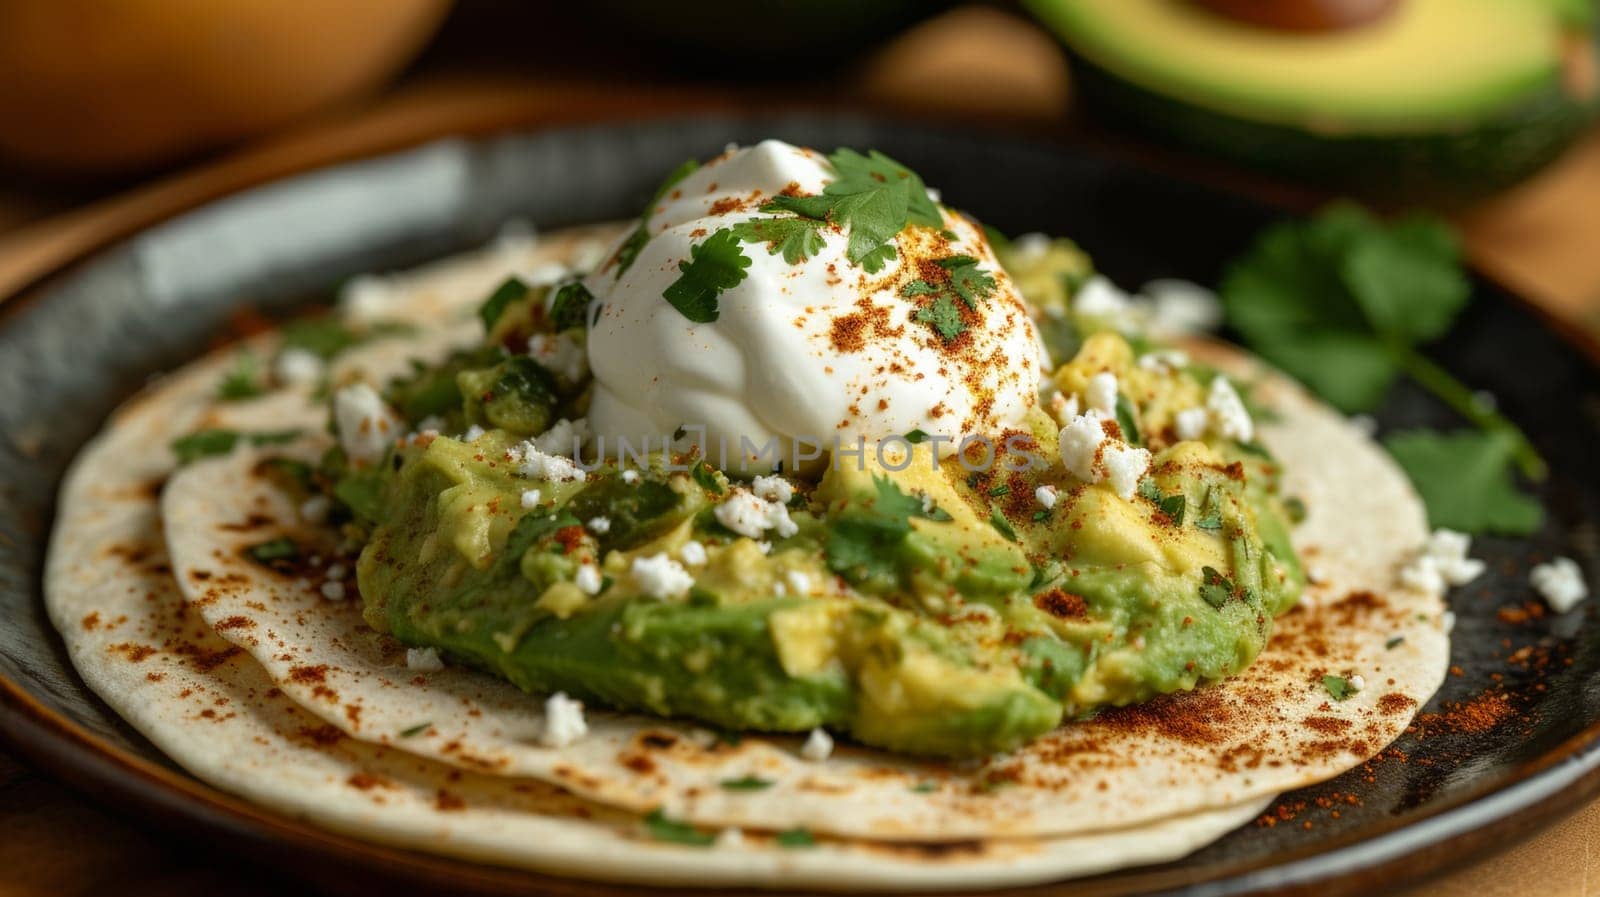 A plate of a tortilla with avocado and cilantro on it